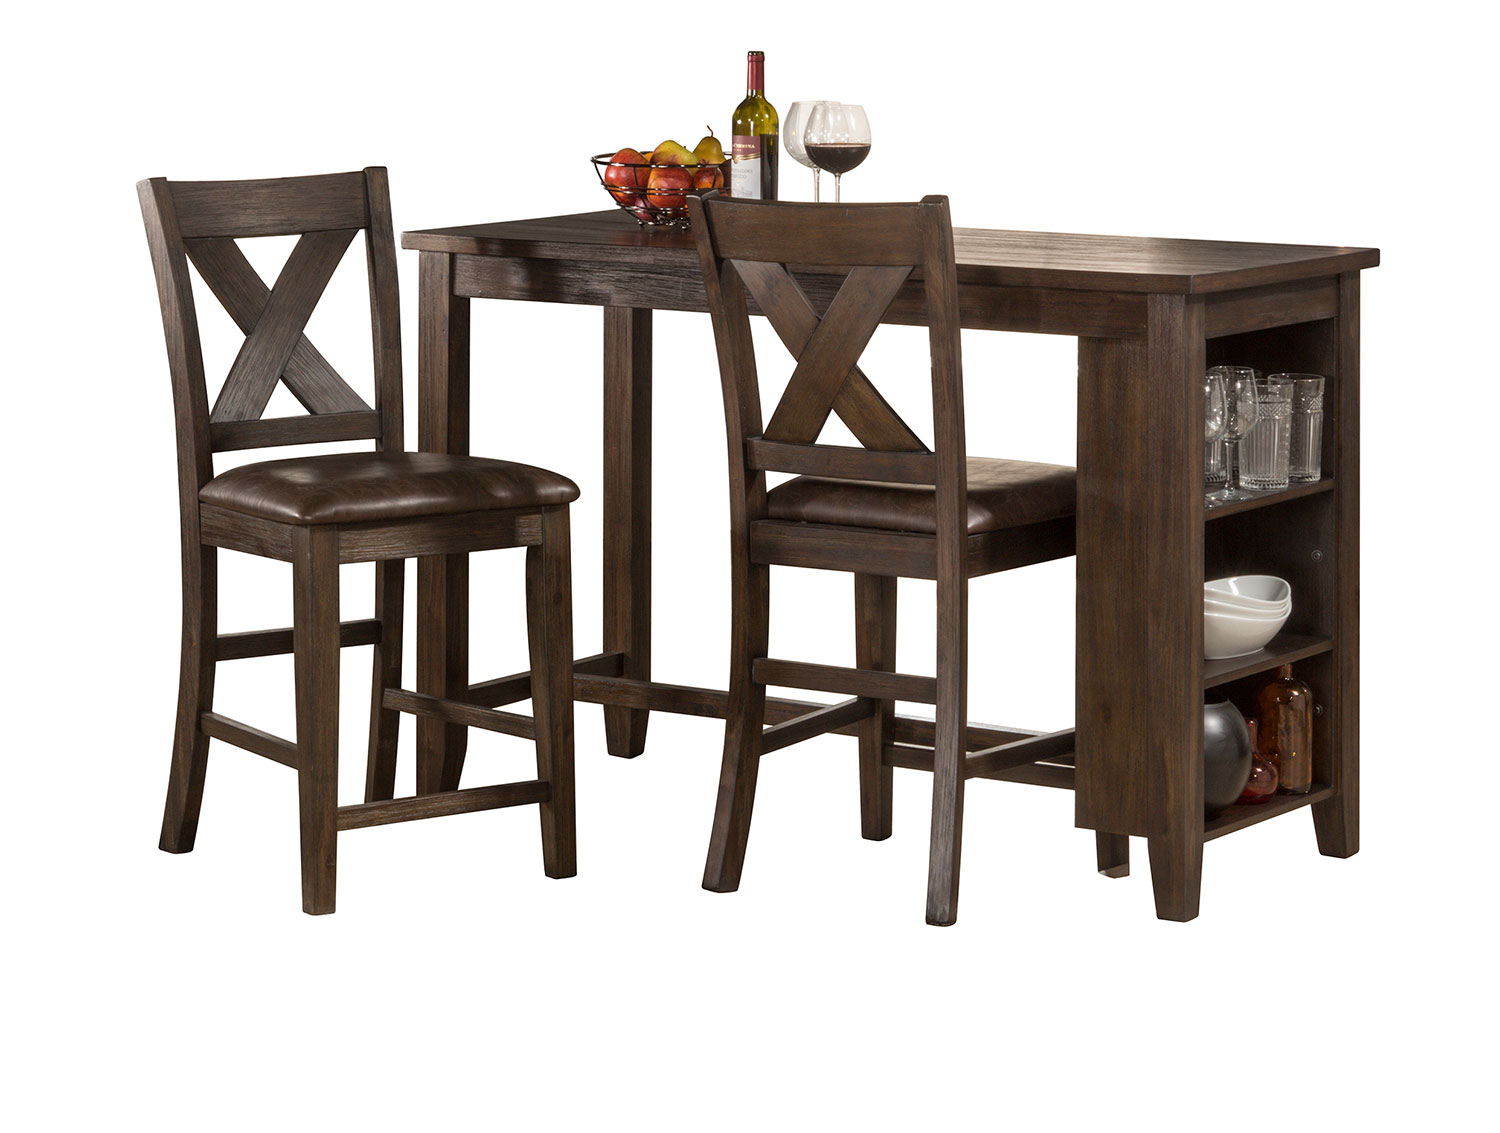 Hillsdale Spencer 3 Piece Counter Height Dining Set with X-Back Counter Height Stools - Dark Espresso